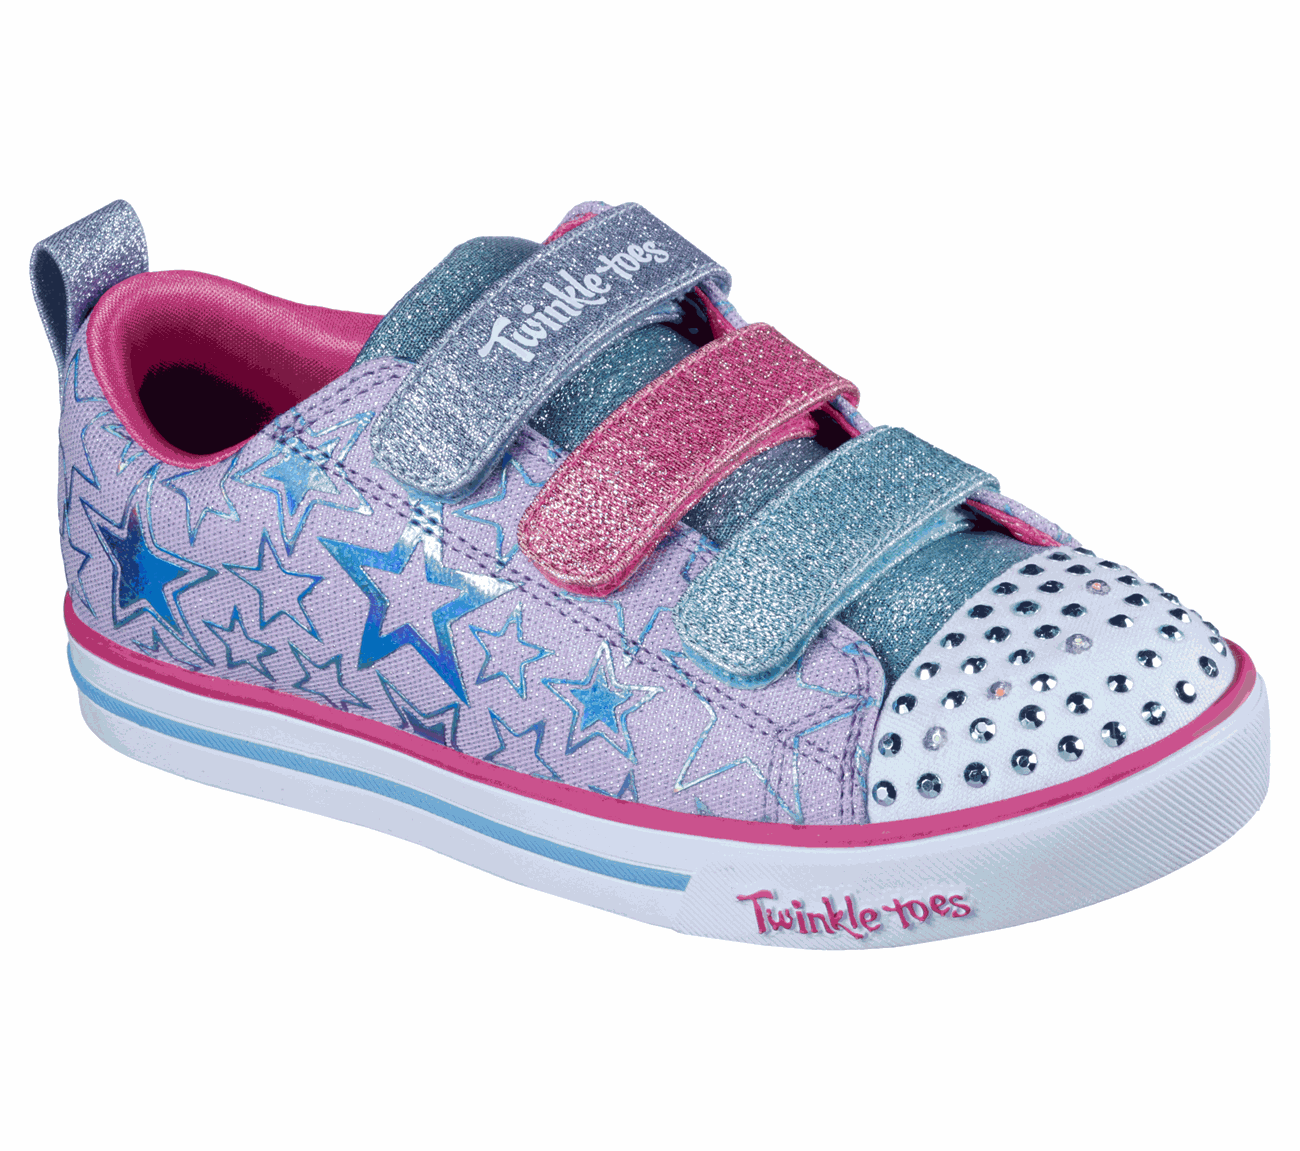 twinkle toes size 8 \u003e Factory Store